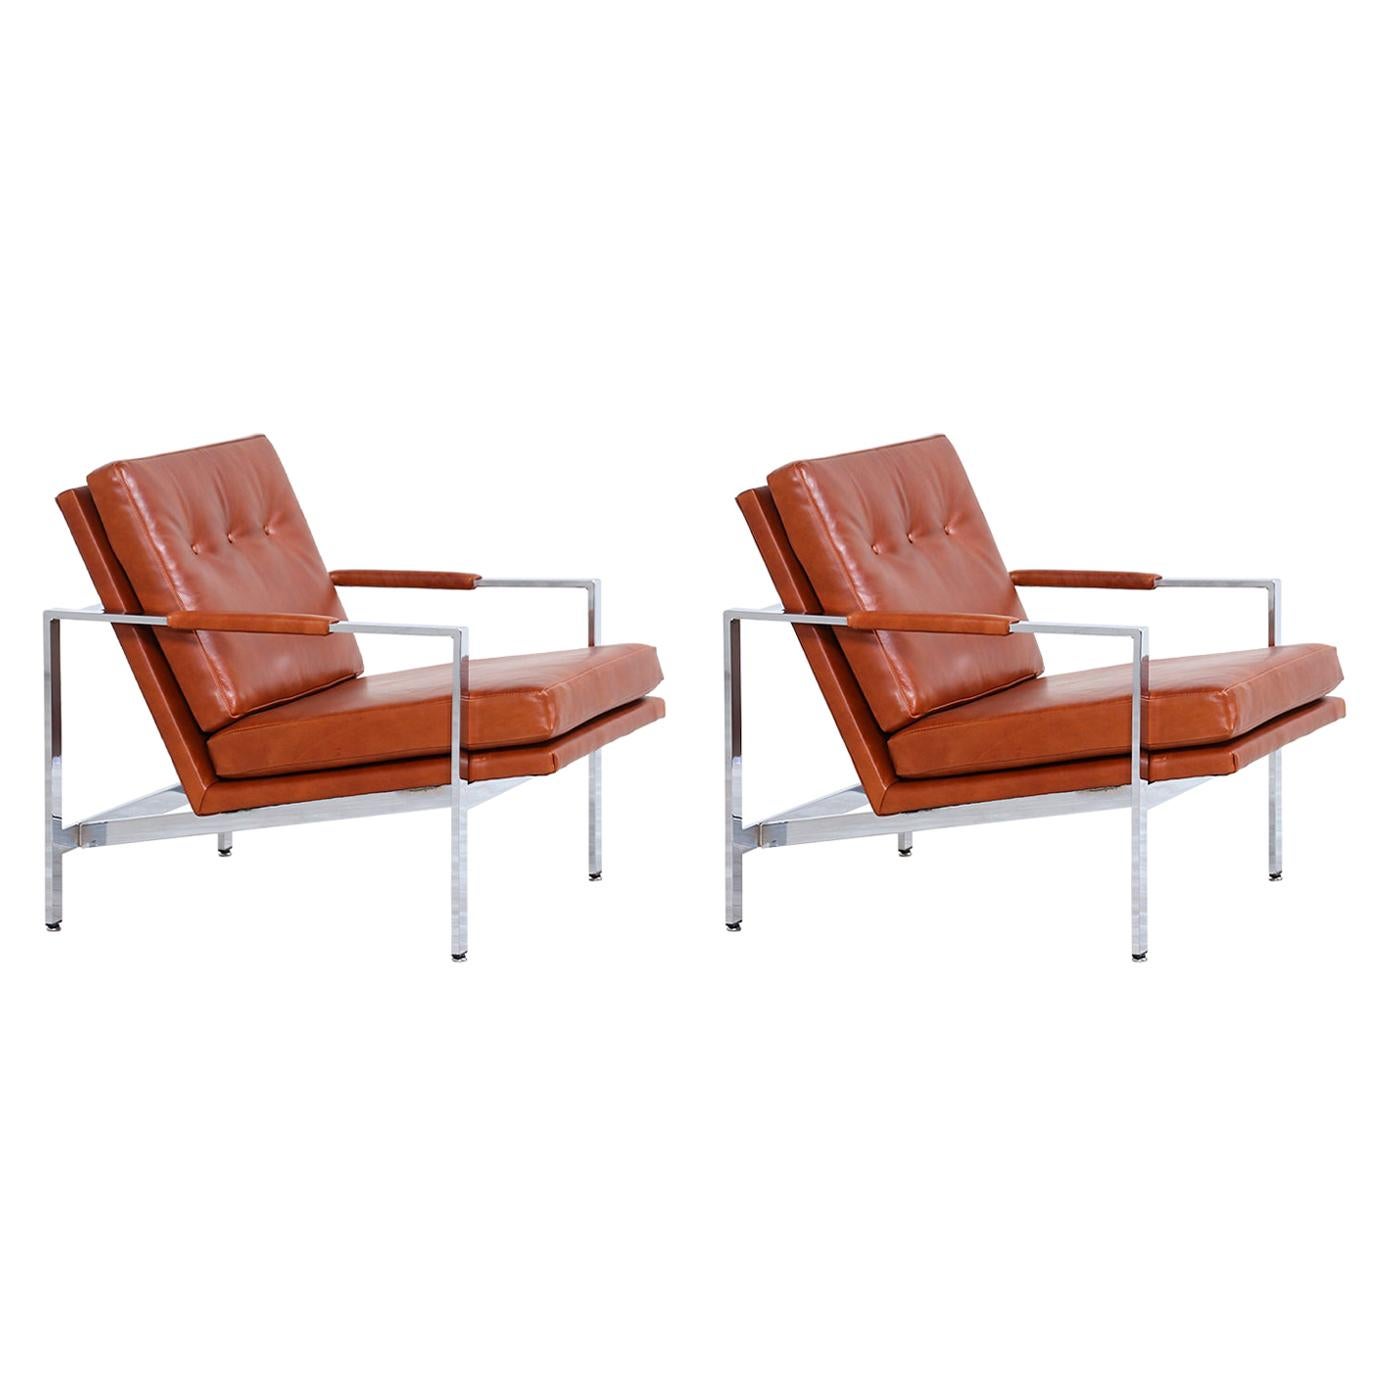 Milo Baughman Leather and Chrome Lounge Chairs for Thayer Coggin